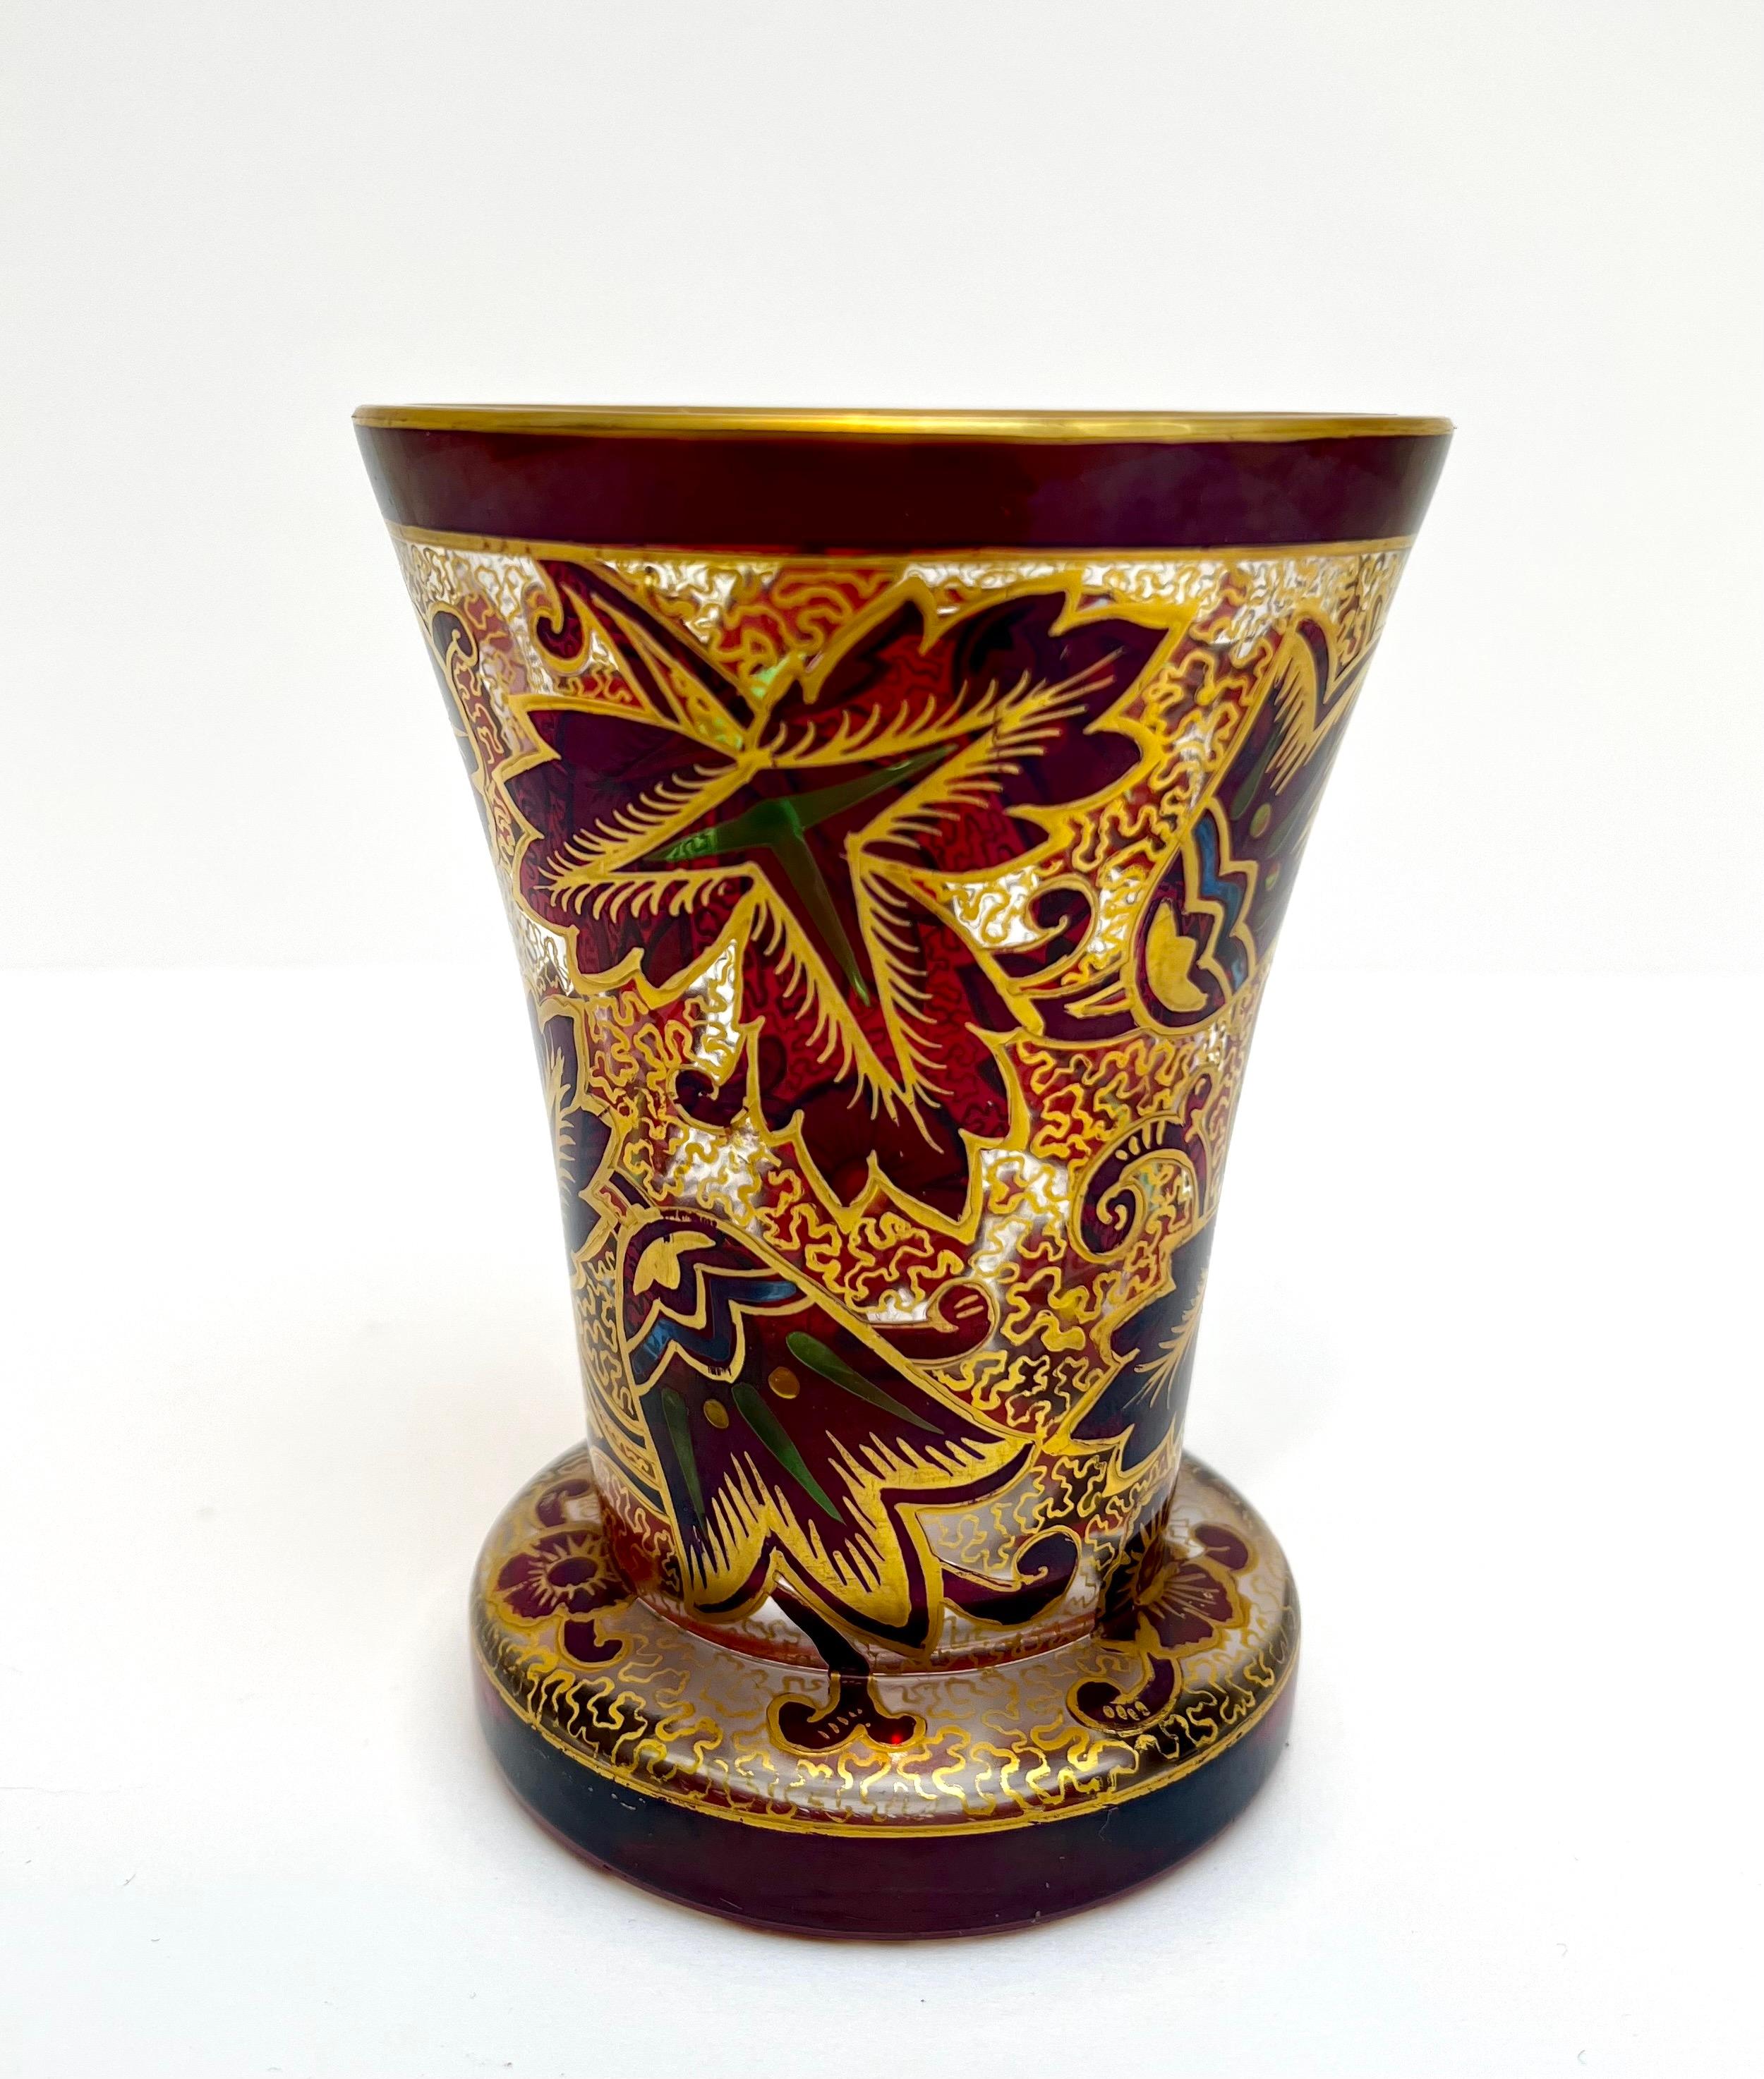 A superb unmatched pair of Art Nouveau Bohemian art glass vases or beakers by Julius Mulhaus & Co, Haida. The thickly made shaped rounded glass vase is decorated in a stained glass window style with floral designs on one beaker. And a vibrant